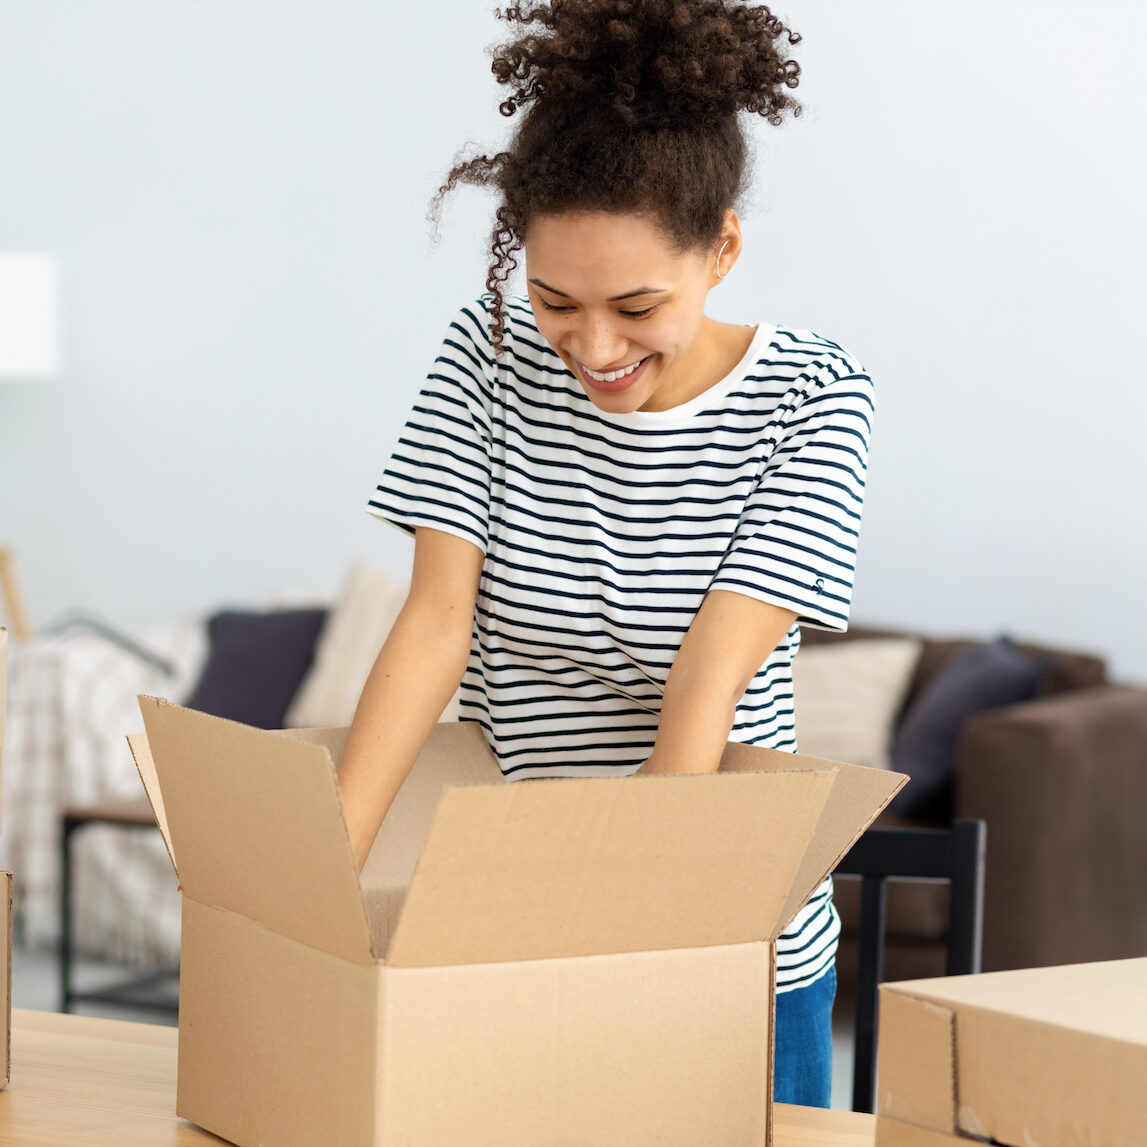 Young smiling African American woman unpacking boxes standing at home. Unpacking parcel, delivery, moving to new house concept. Female Student moves to new home